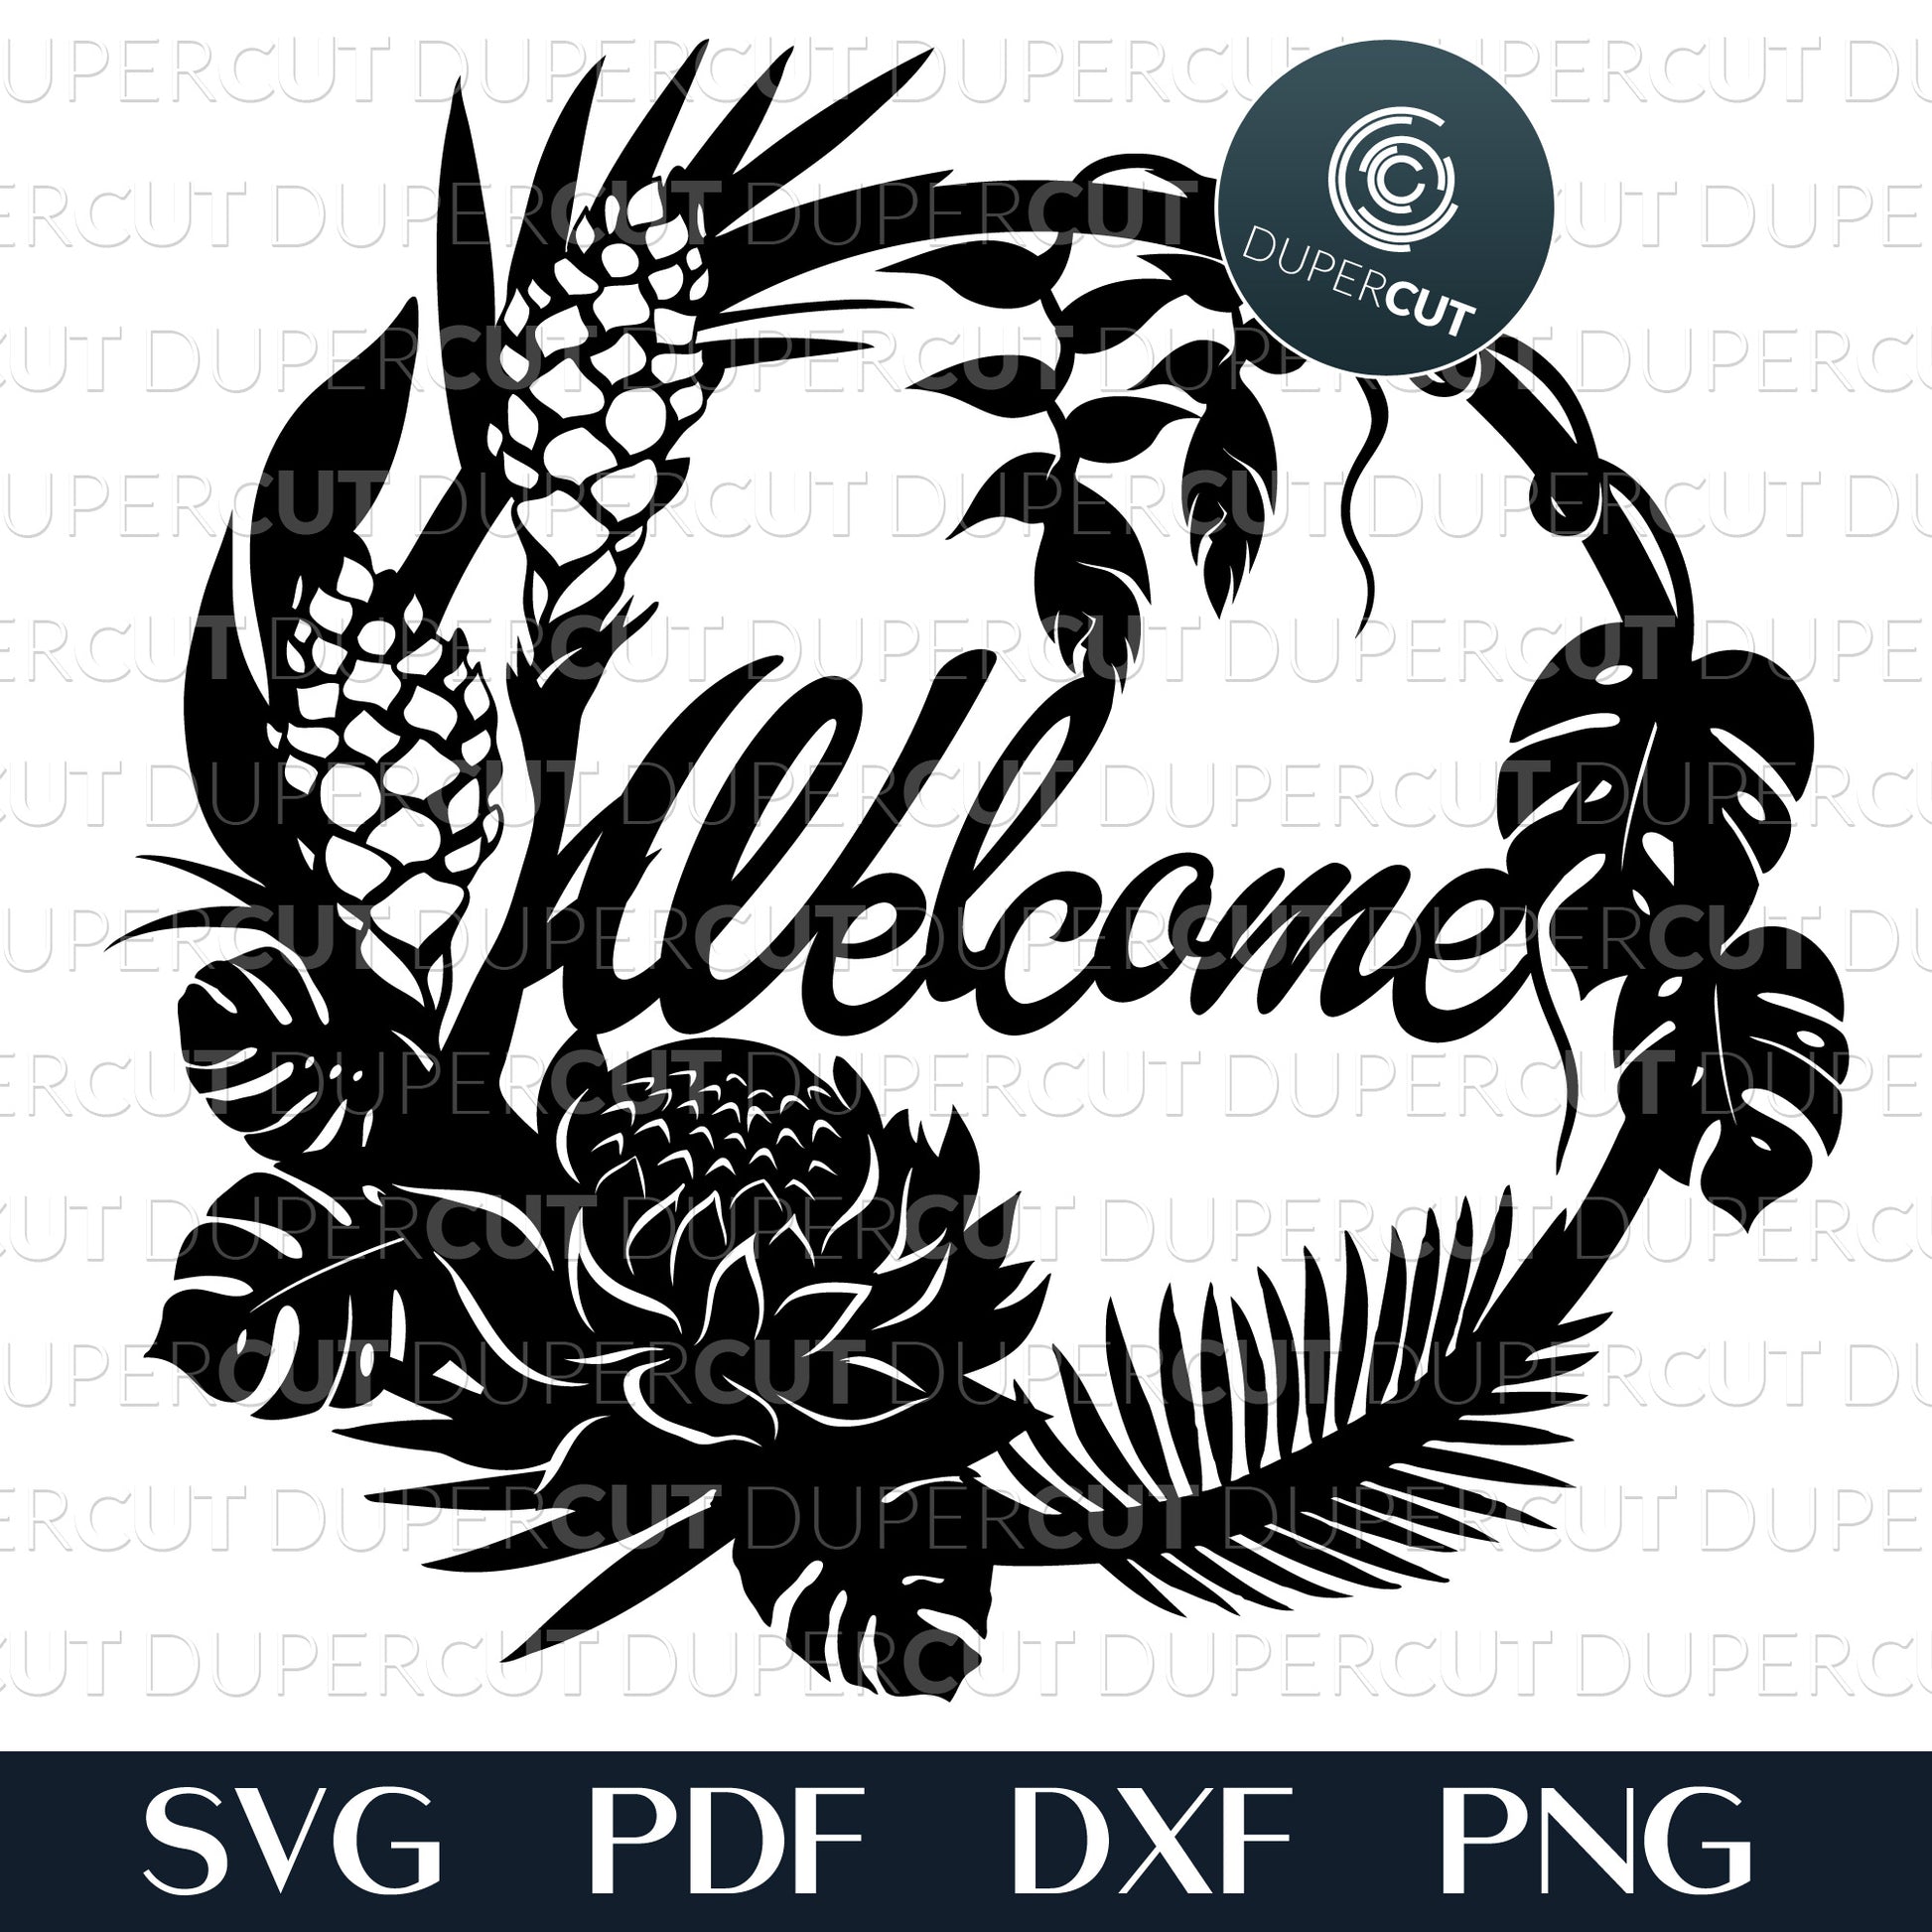 Tropical welcome sign, cabin dcoration. SVG PNG DXF cutting files for Cricut, Glowforge, Silhouette cameo, laser engraving